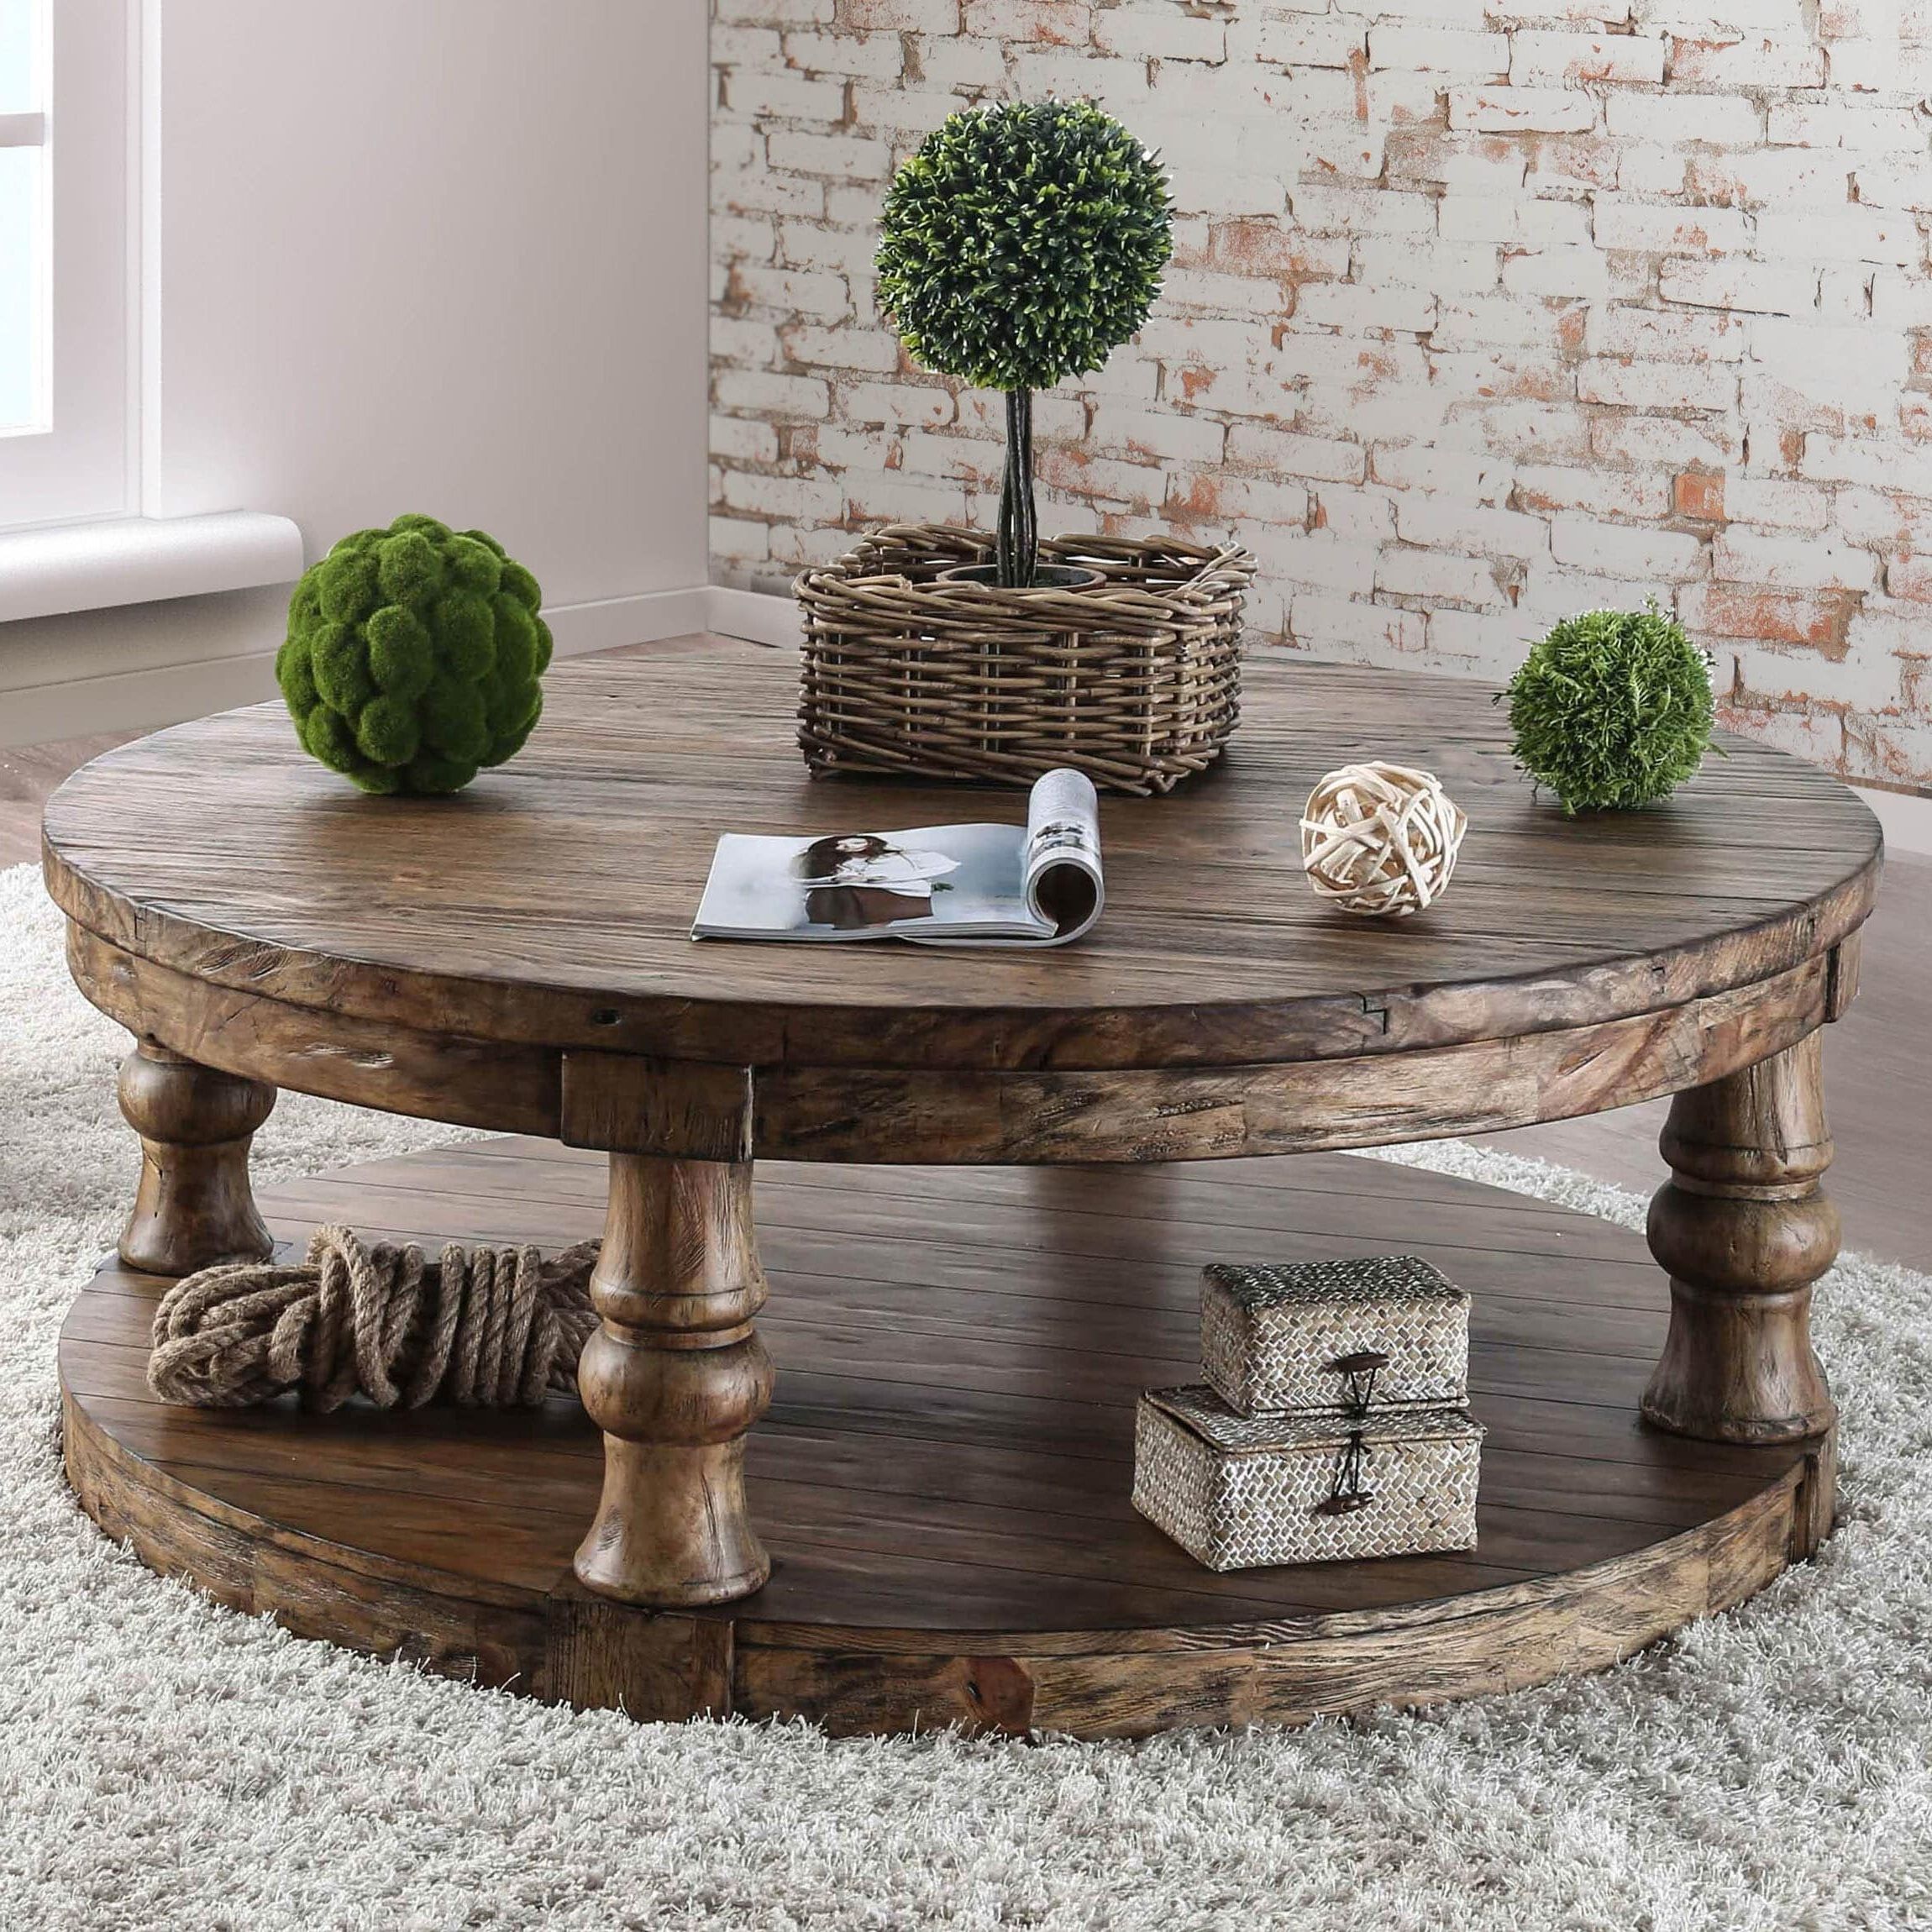 Round Rustic Coffee Table Sets – Rustic Coffee Tables That You Need To Regarding Rustic Wood Coffee Tables (Gallery 18 of 20)